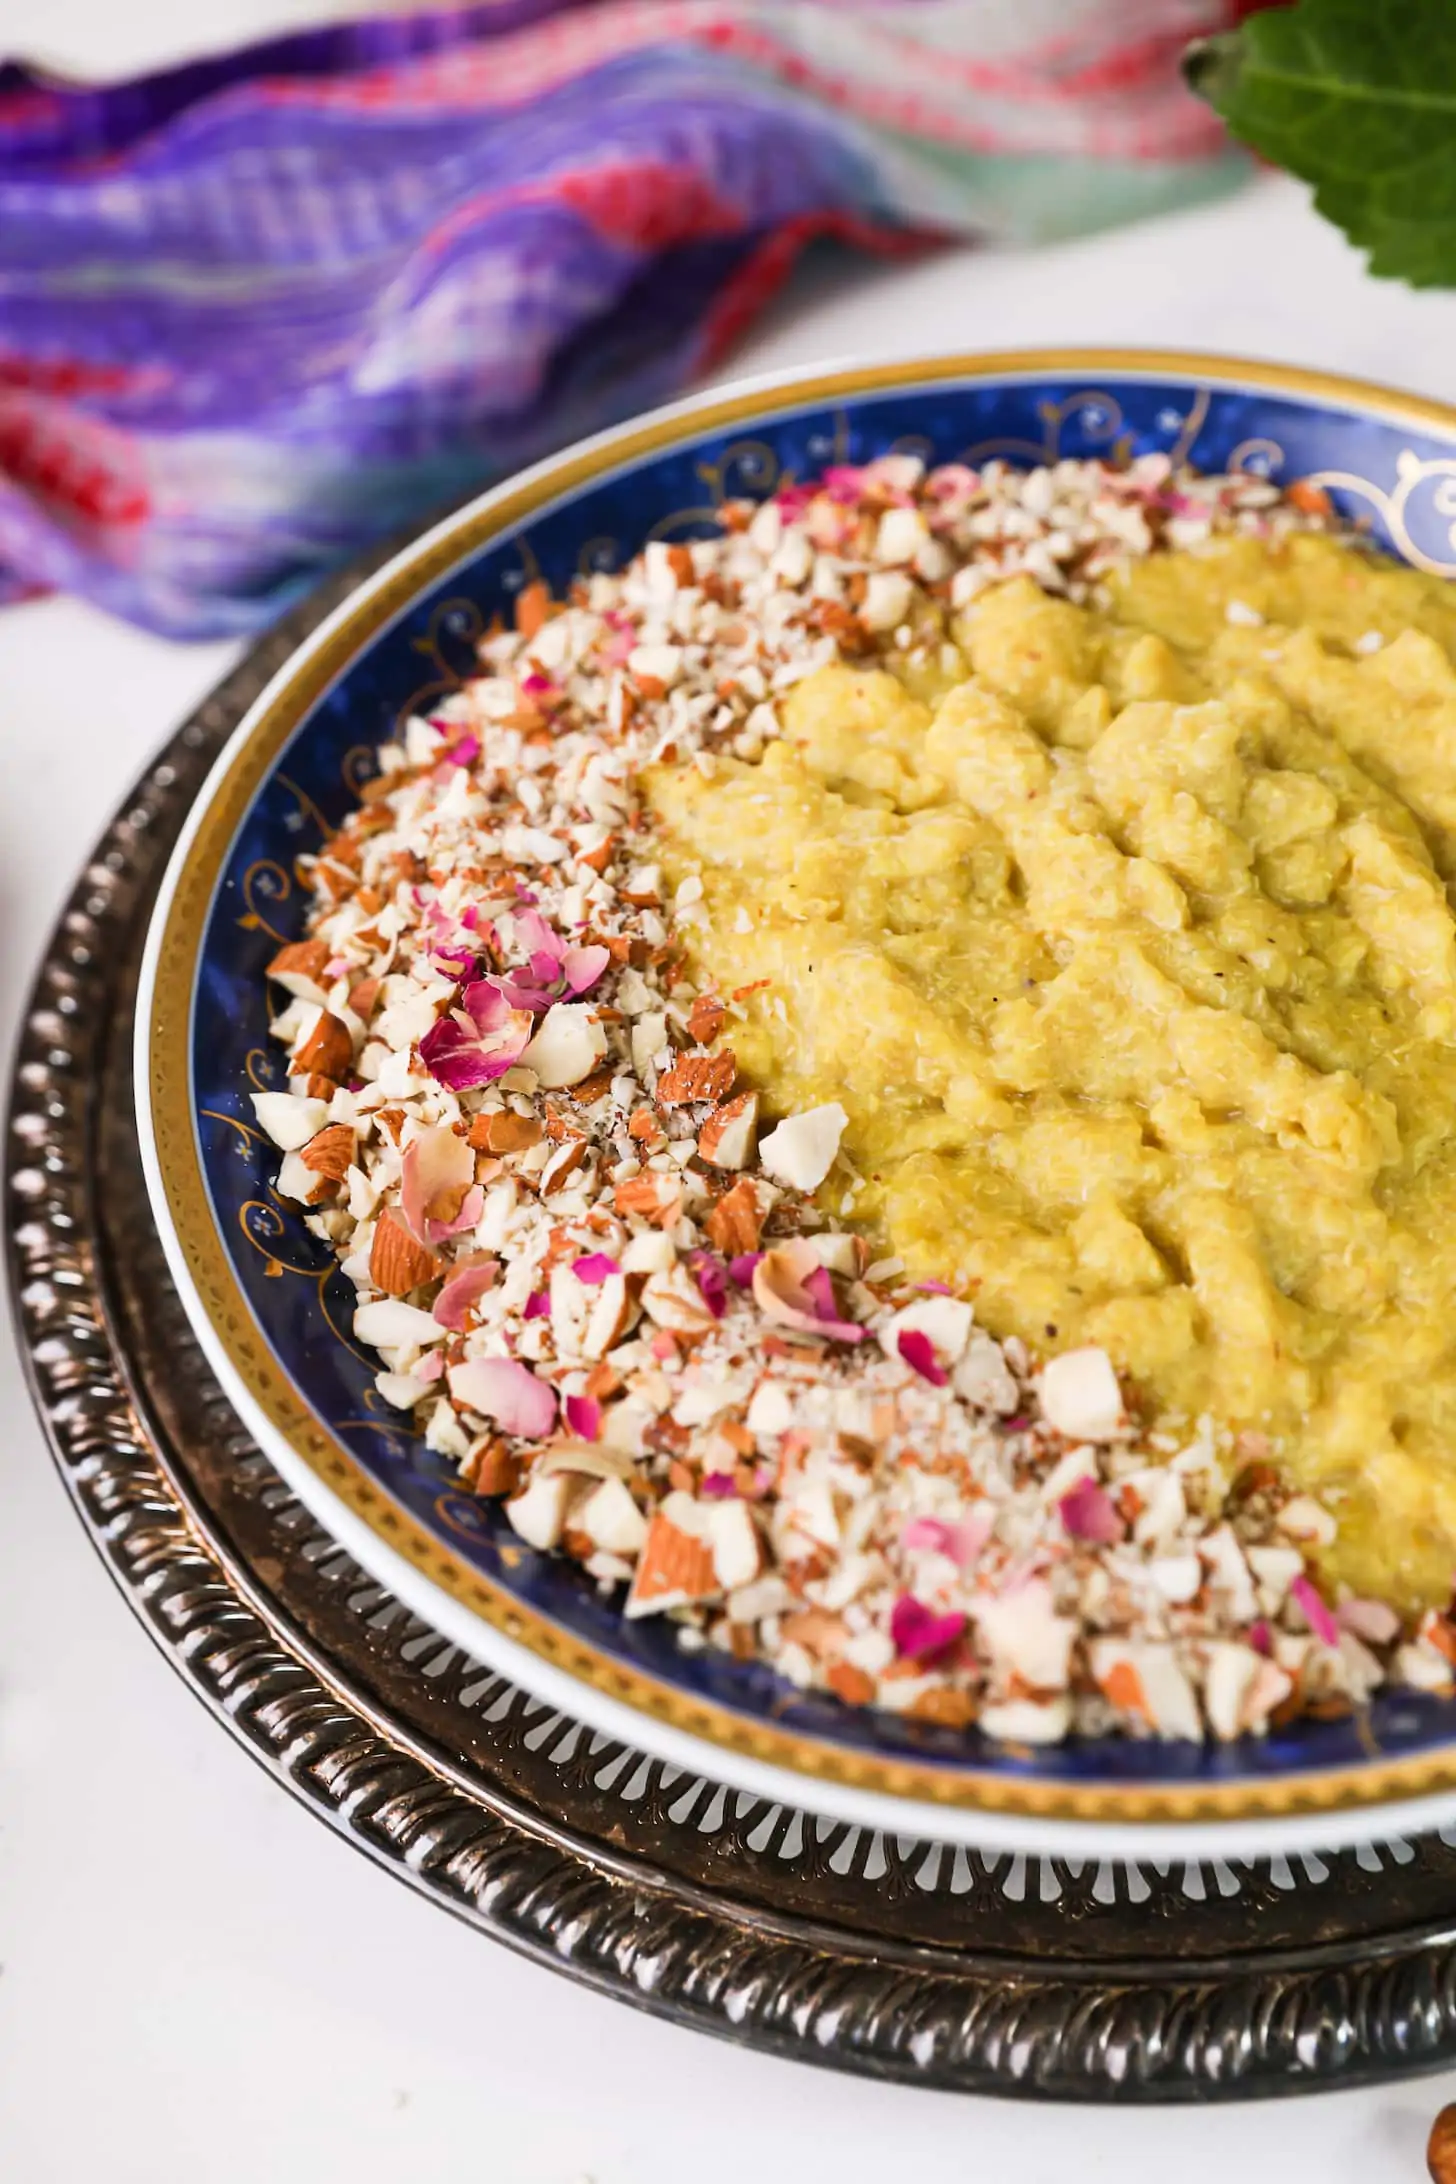 close up perspective shot of a bowl of yellow pudding topping with crushed nuts and pink petals on a gold tray.